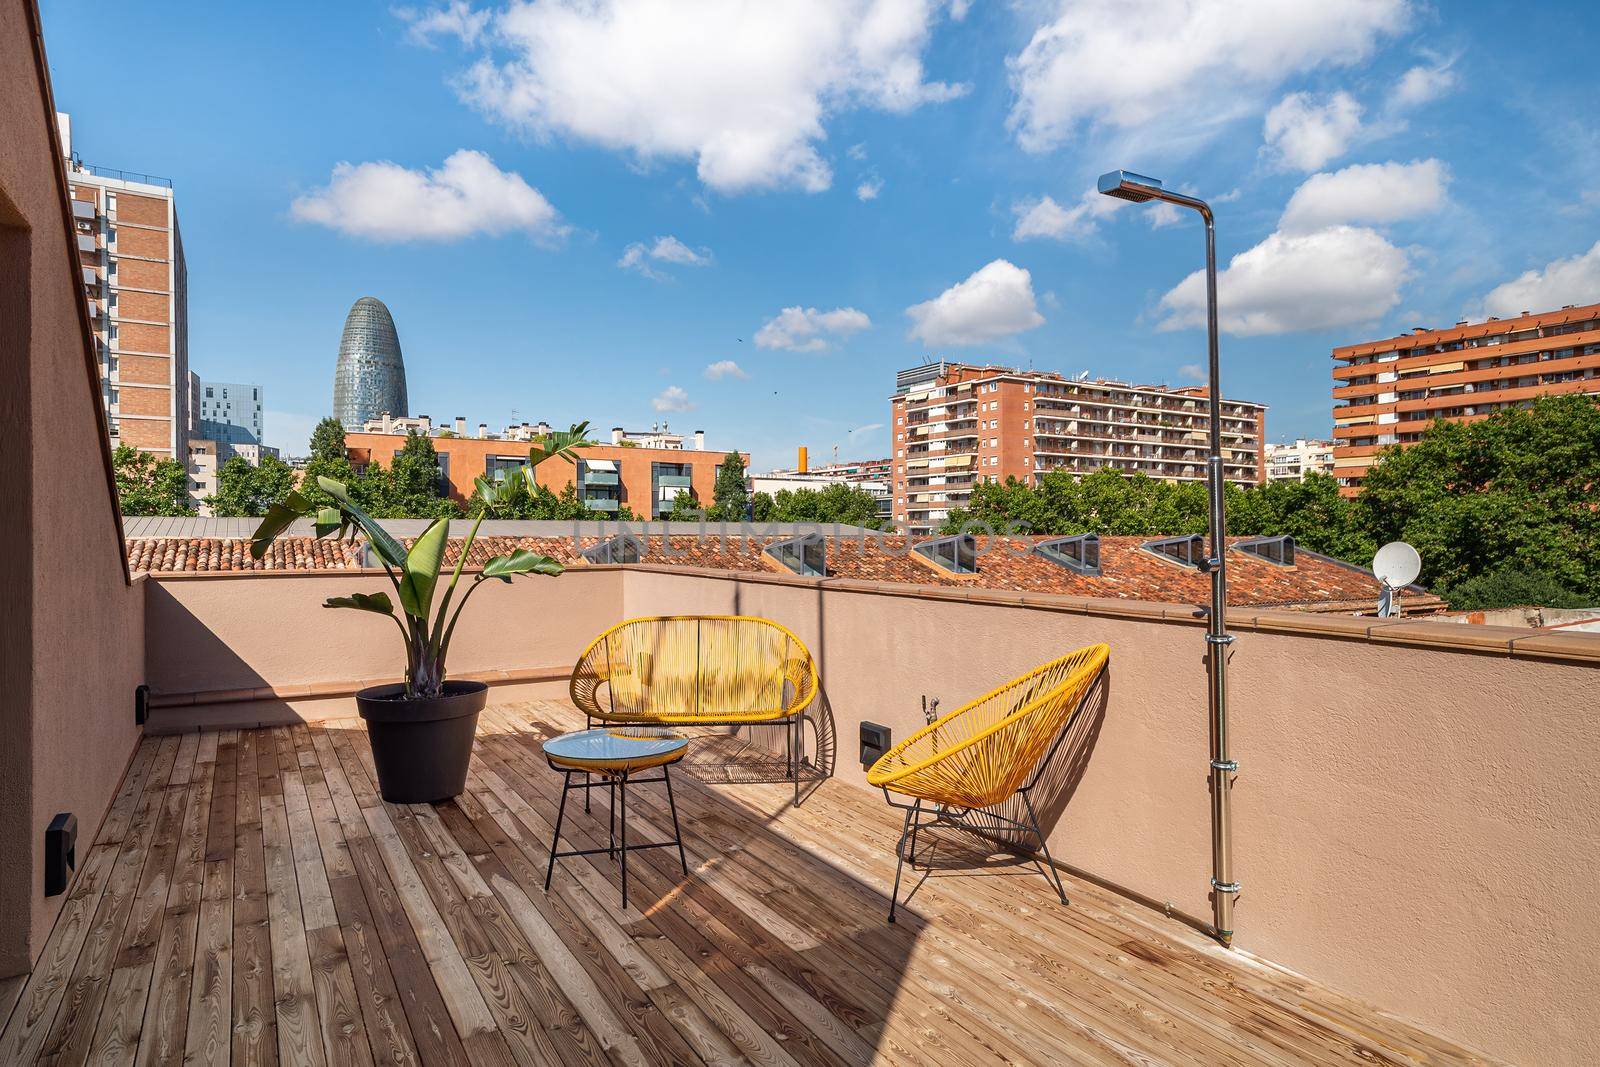 Bright terrace with yellow exterior chairs, wooden floor, shower and amazing view of area of Poblenou, old industrial district converted into new modern neighbourhood in Barcelona, Spain by apavlin